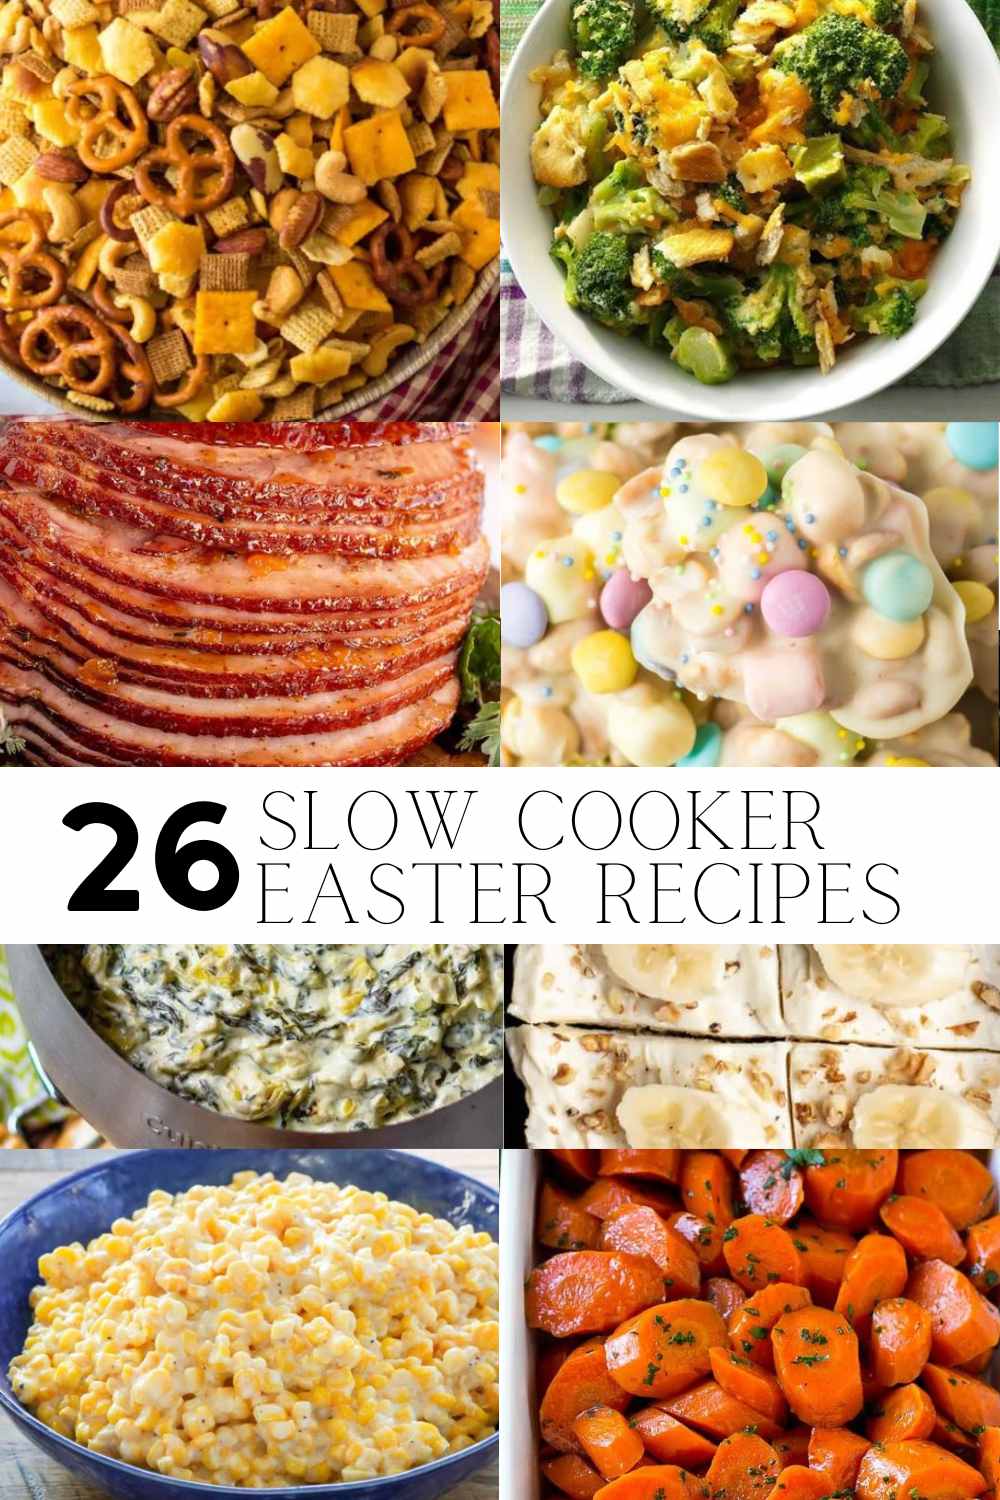 26 Slow Cooker Easter Recipes